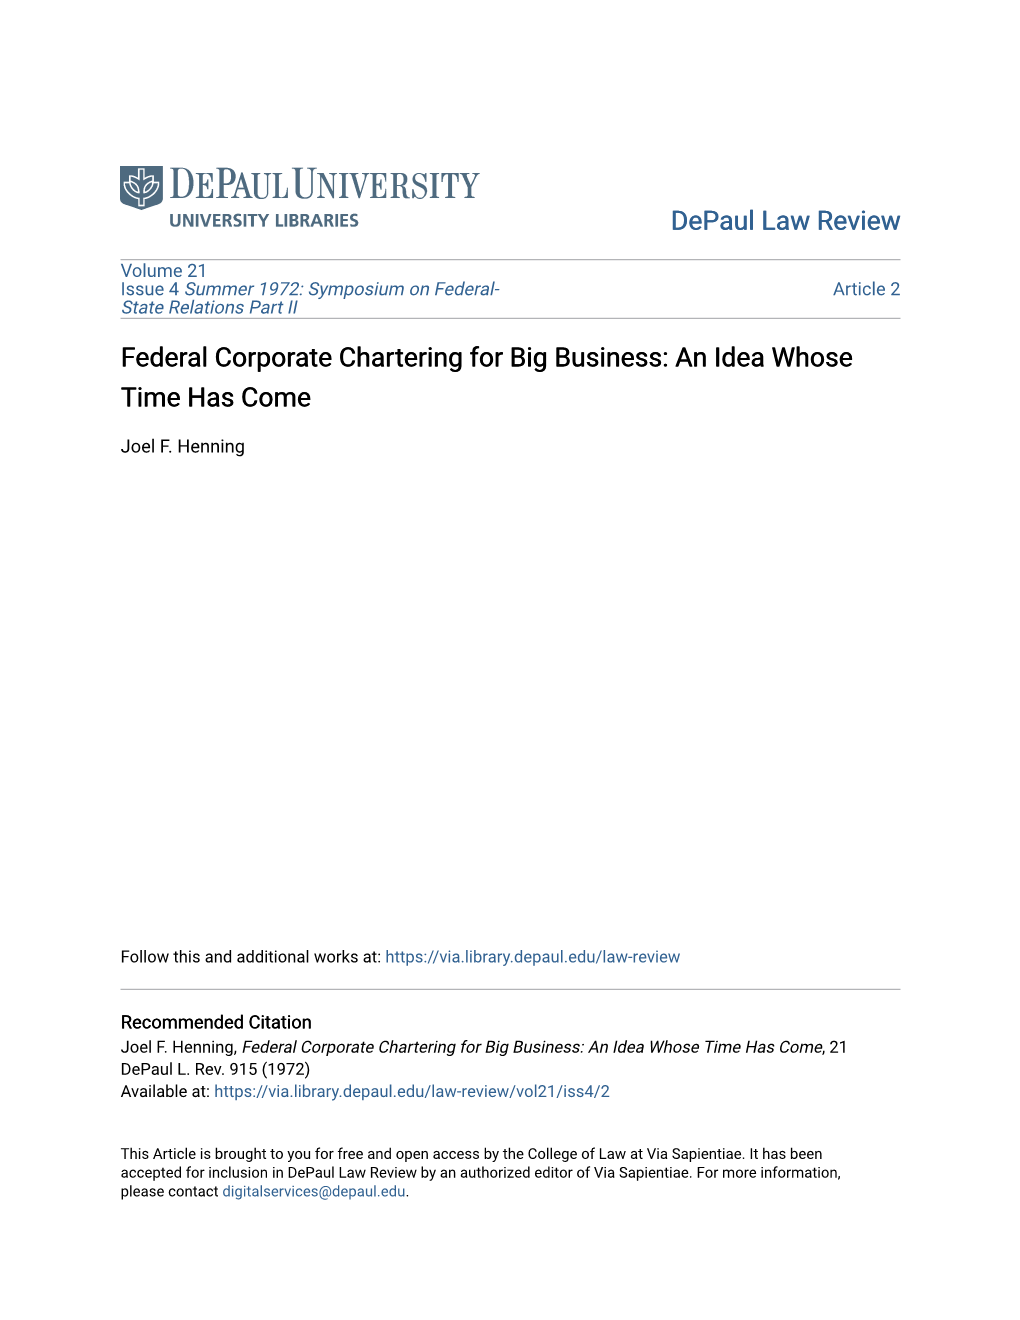 Federal Corporate Chartering for Big Business: an Idea Whose Time Has Come